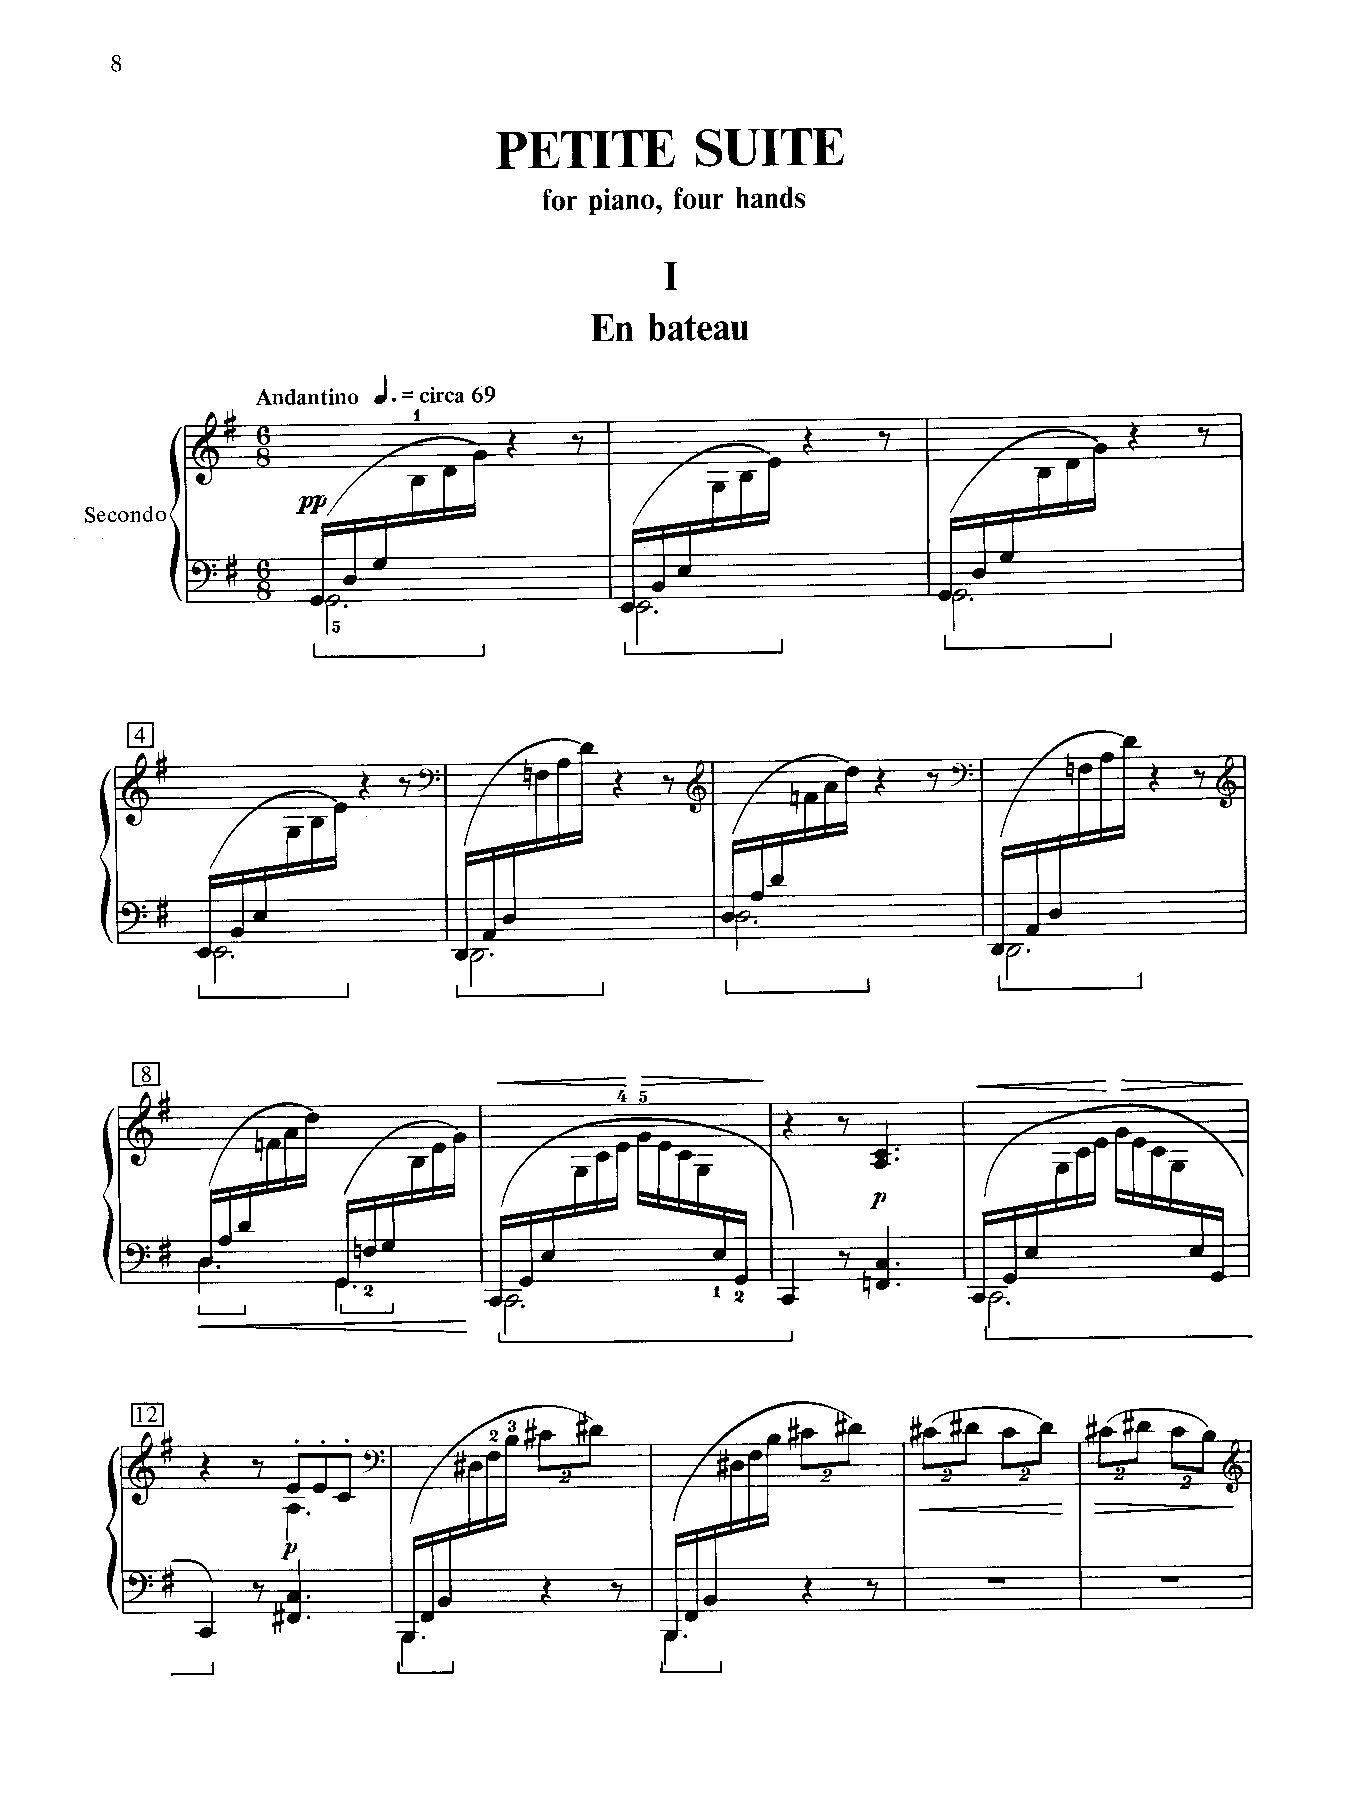 Debussy: Petite Suite for Piano Duet